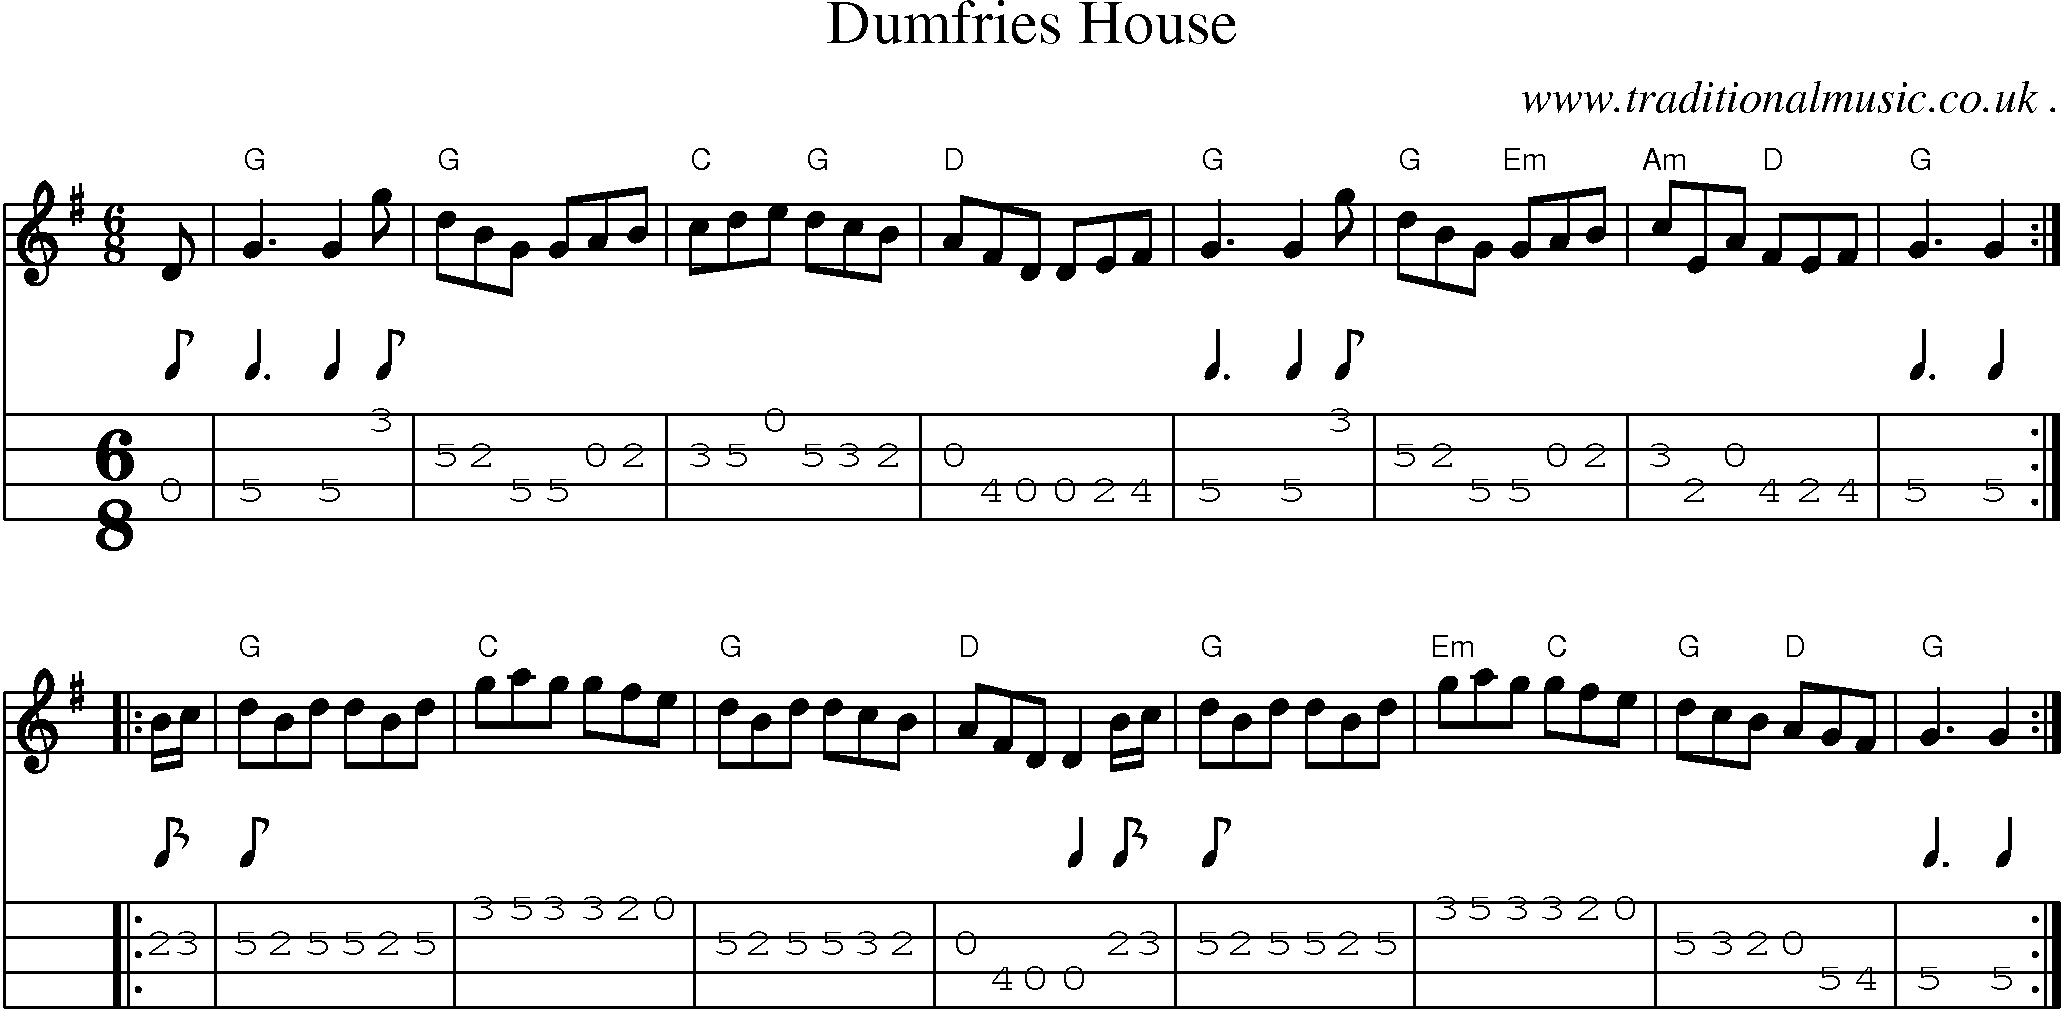 Sheet-music  score, Chords and Mandolin Tabs for Dumfries House